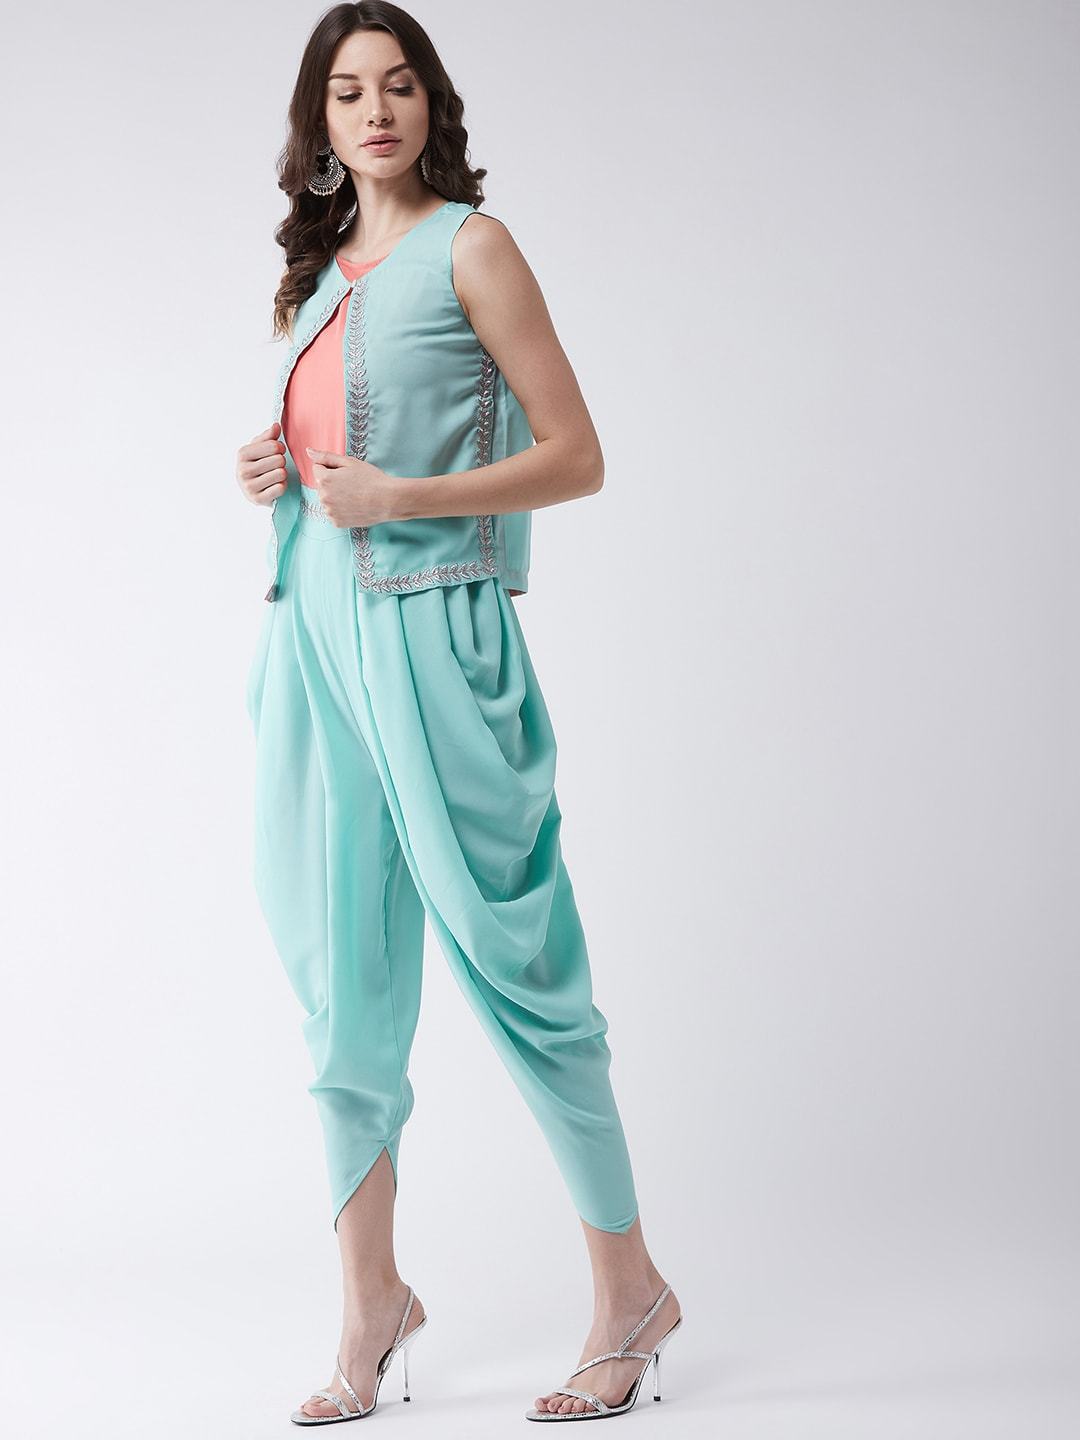 Women's Pastel Embroidered Jumpsuit With Sleeveless Shrug - Pannkh